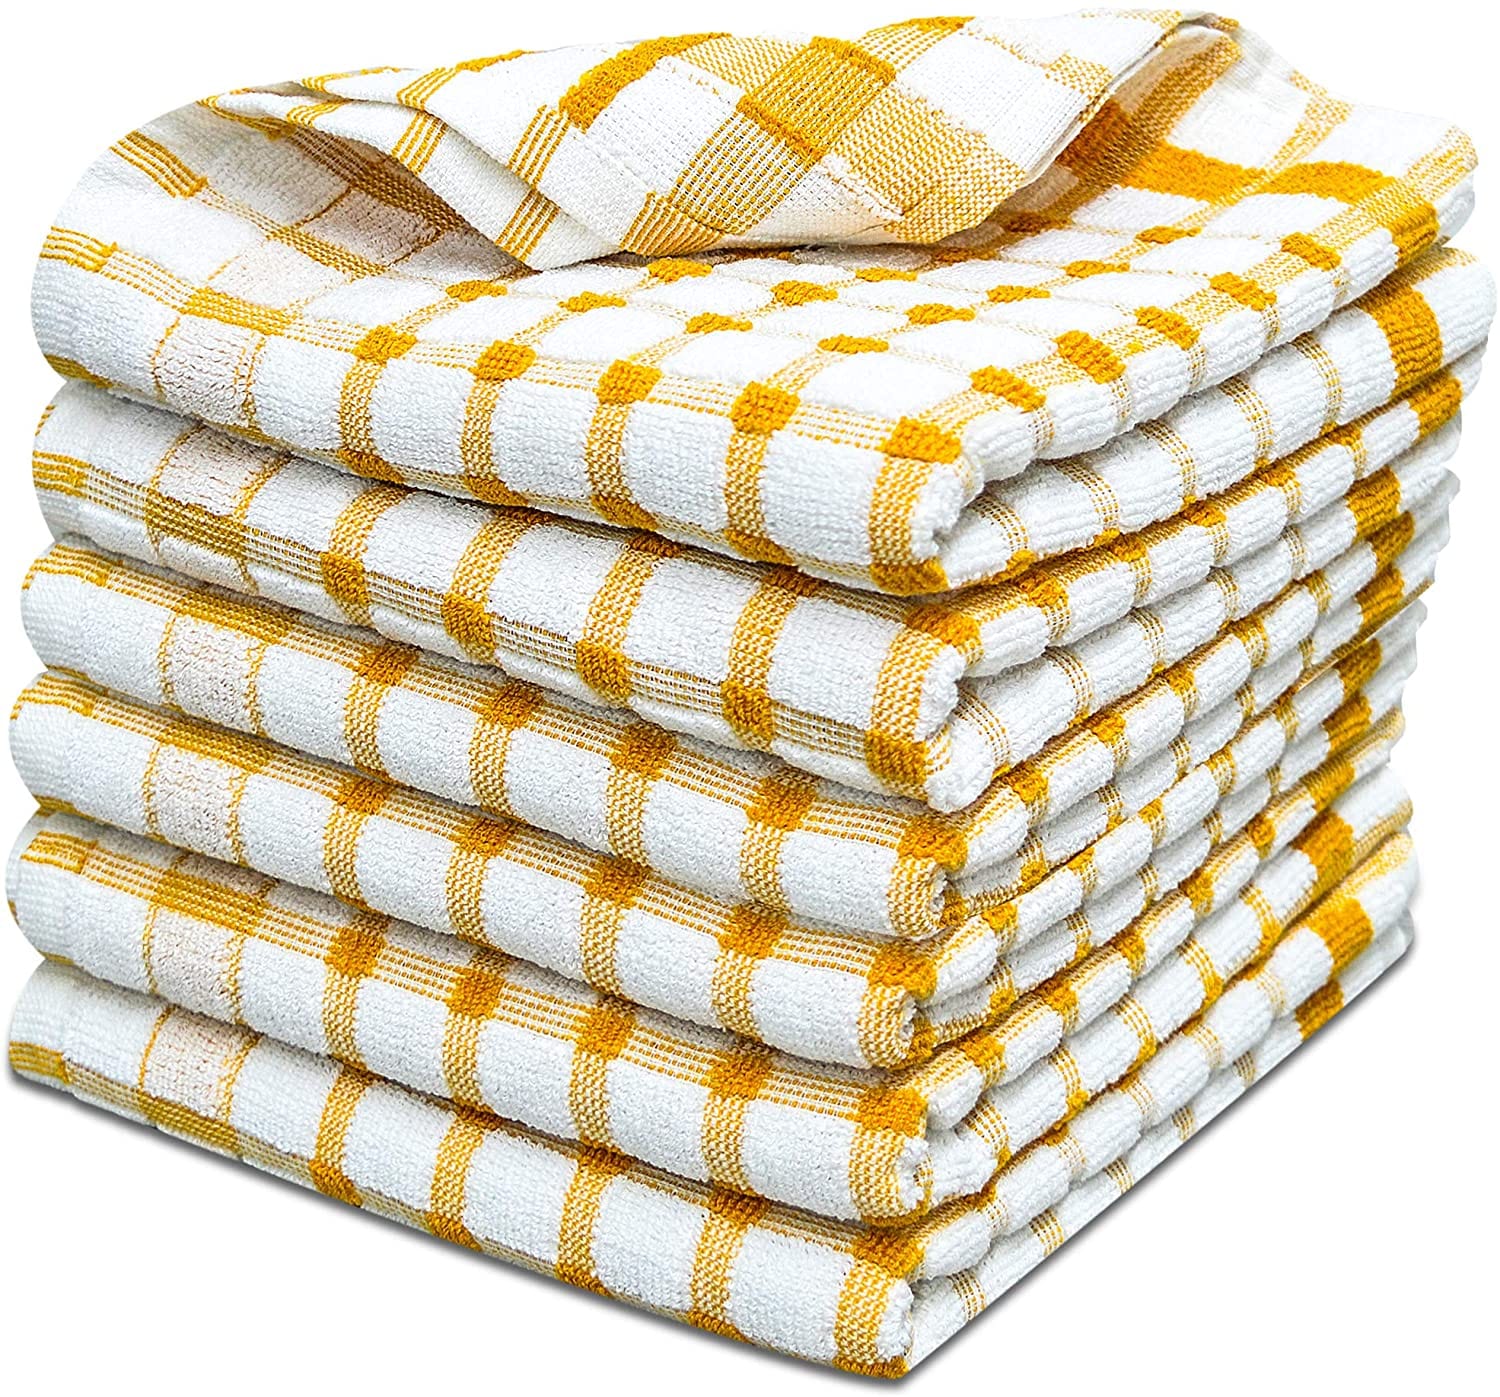 Checkered-Cotton-Terry-Tea-Towels-Kitchen-Dish-Drying-Cloths